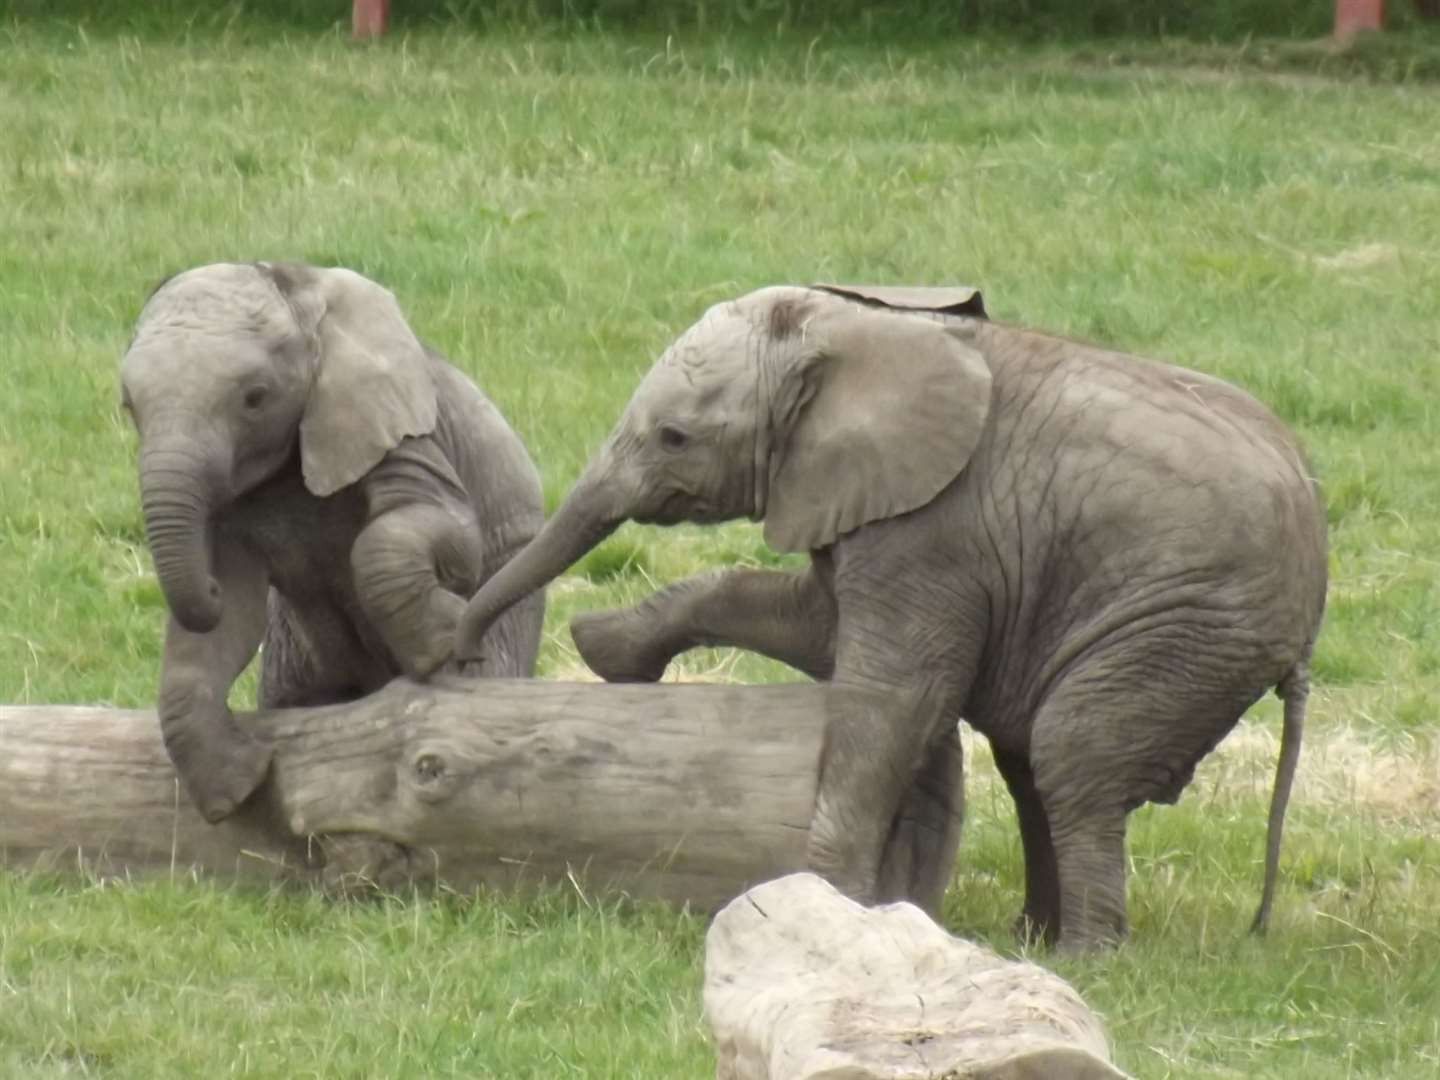 Visitors have spent thousands of hours watching playful elephants over the decades